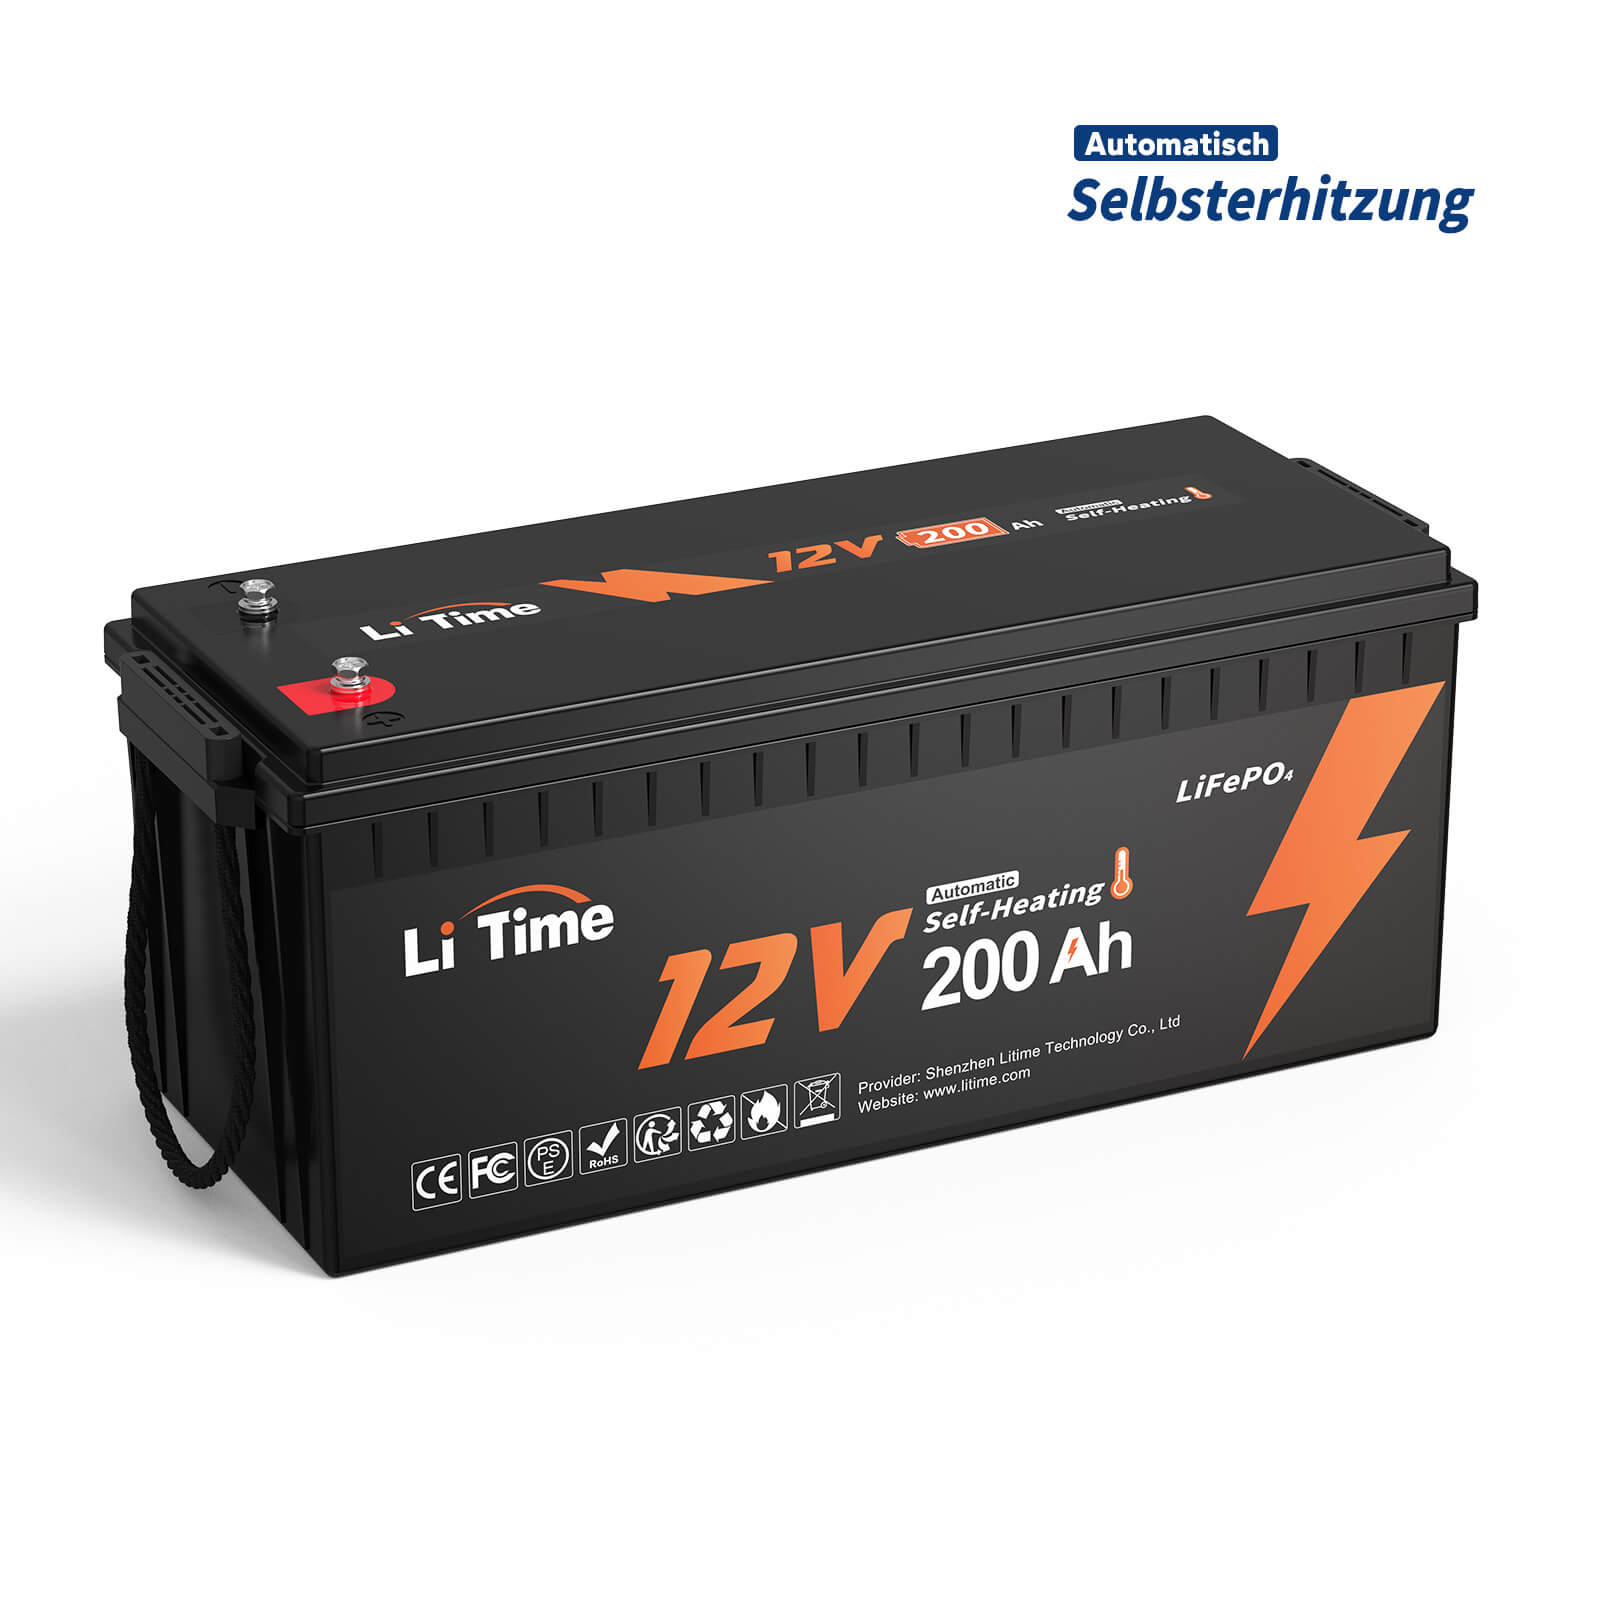 【0% VAT】LiTime 12V 200Ah self-heating LiFePO4 lithium battery with 100A BMS, supports low temp charging -20°C